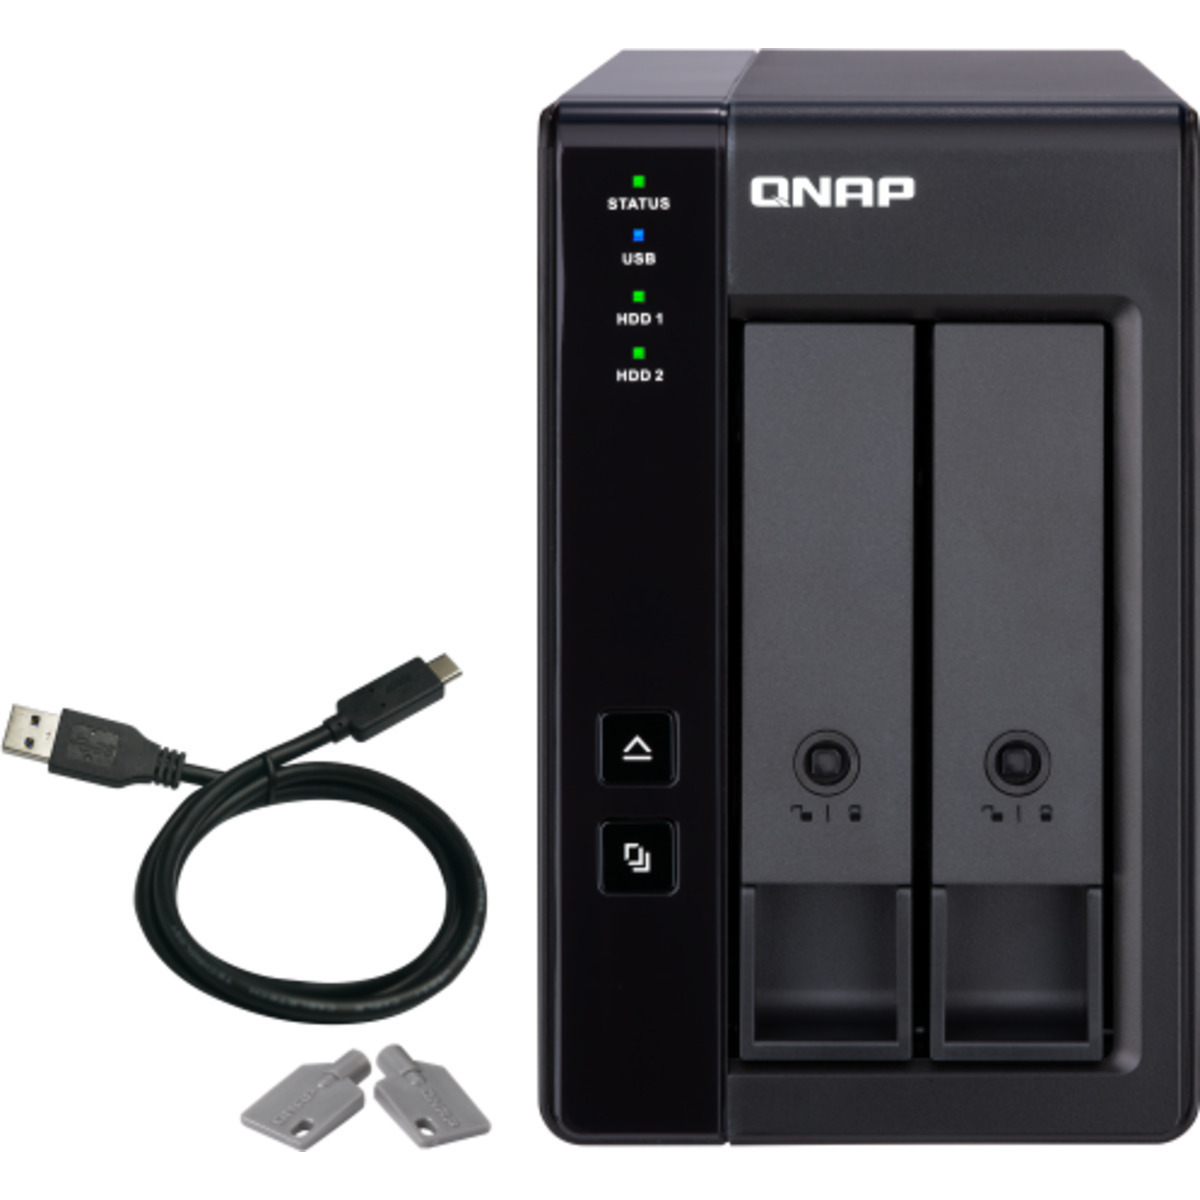 buy $962 QNAP TR-002 External Expansion Drive 40tb Desktop Expansion Enclosure 2x20000gb Seagate EXOS X20 ST20000NM007D 3.5 7200rpm SATA 6Gb/s HDD ENTERPRISE Class Drives Installed - Burn-In Tested - nas headquarters buy network attached storage server device das new raid-5 free shipping simply usa TR-002 External Expansion Drive